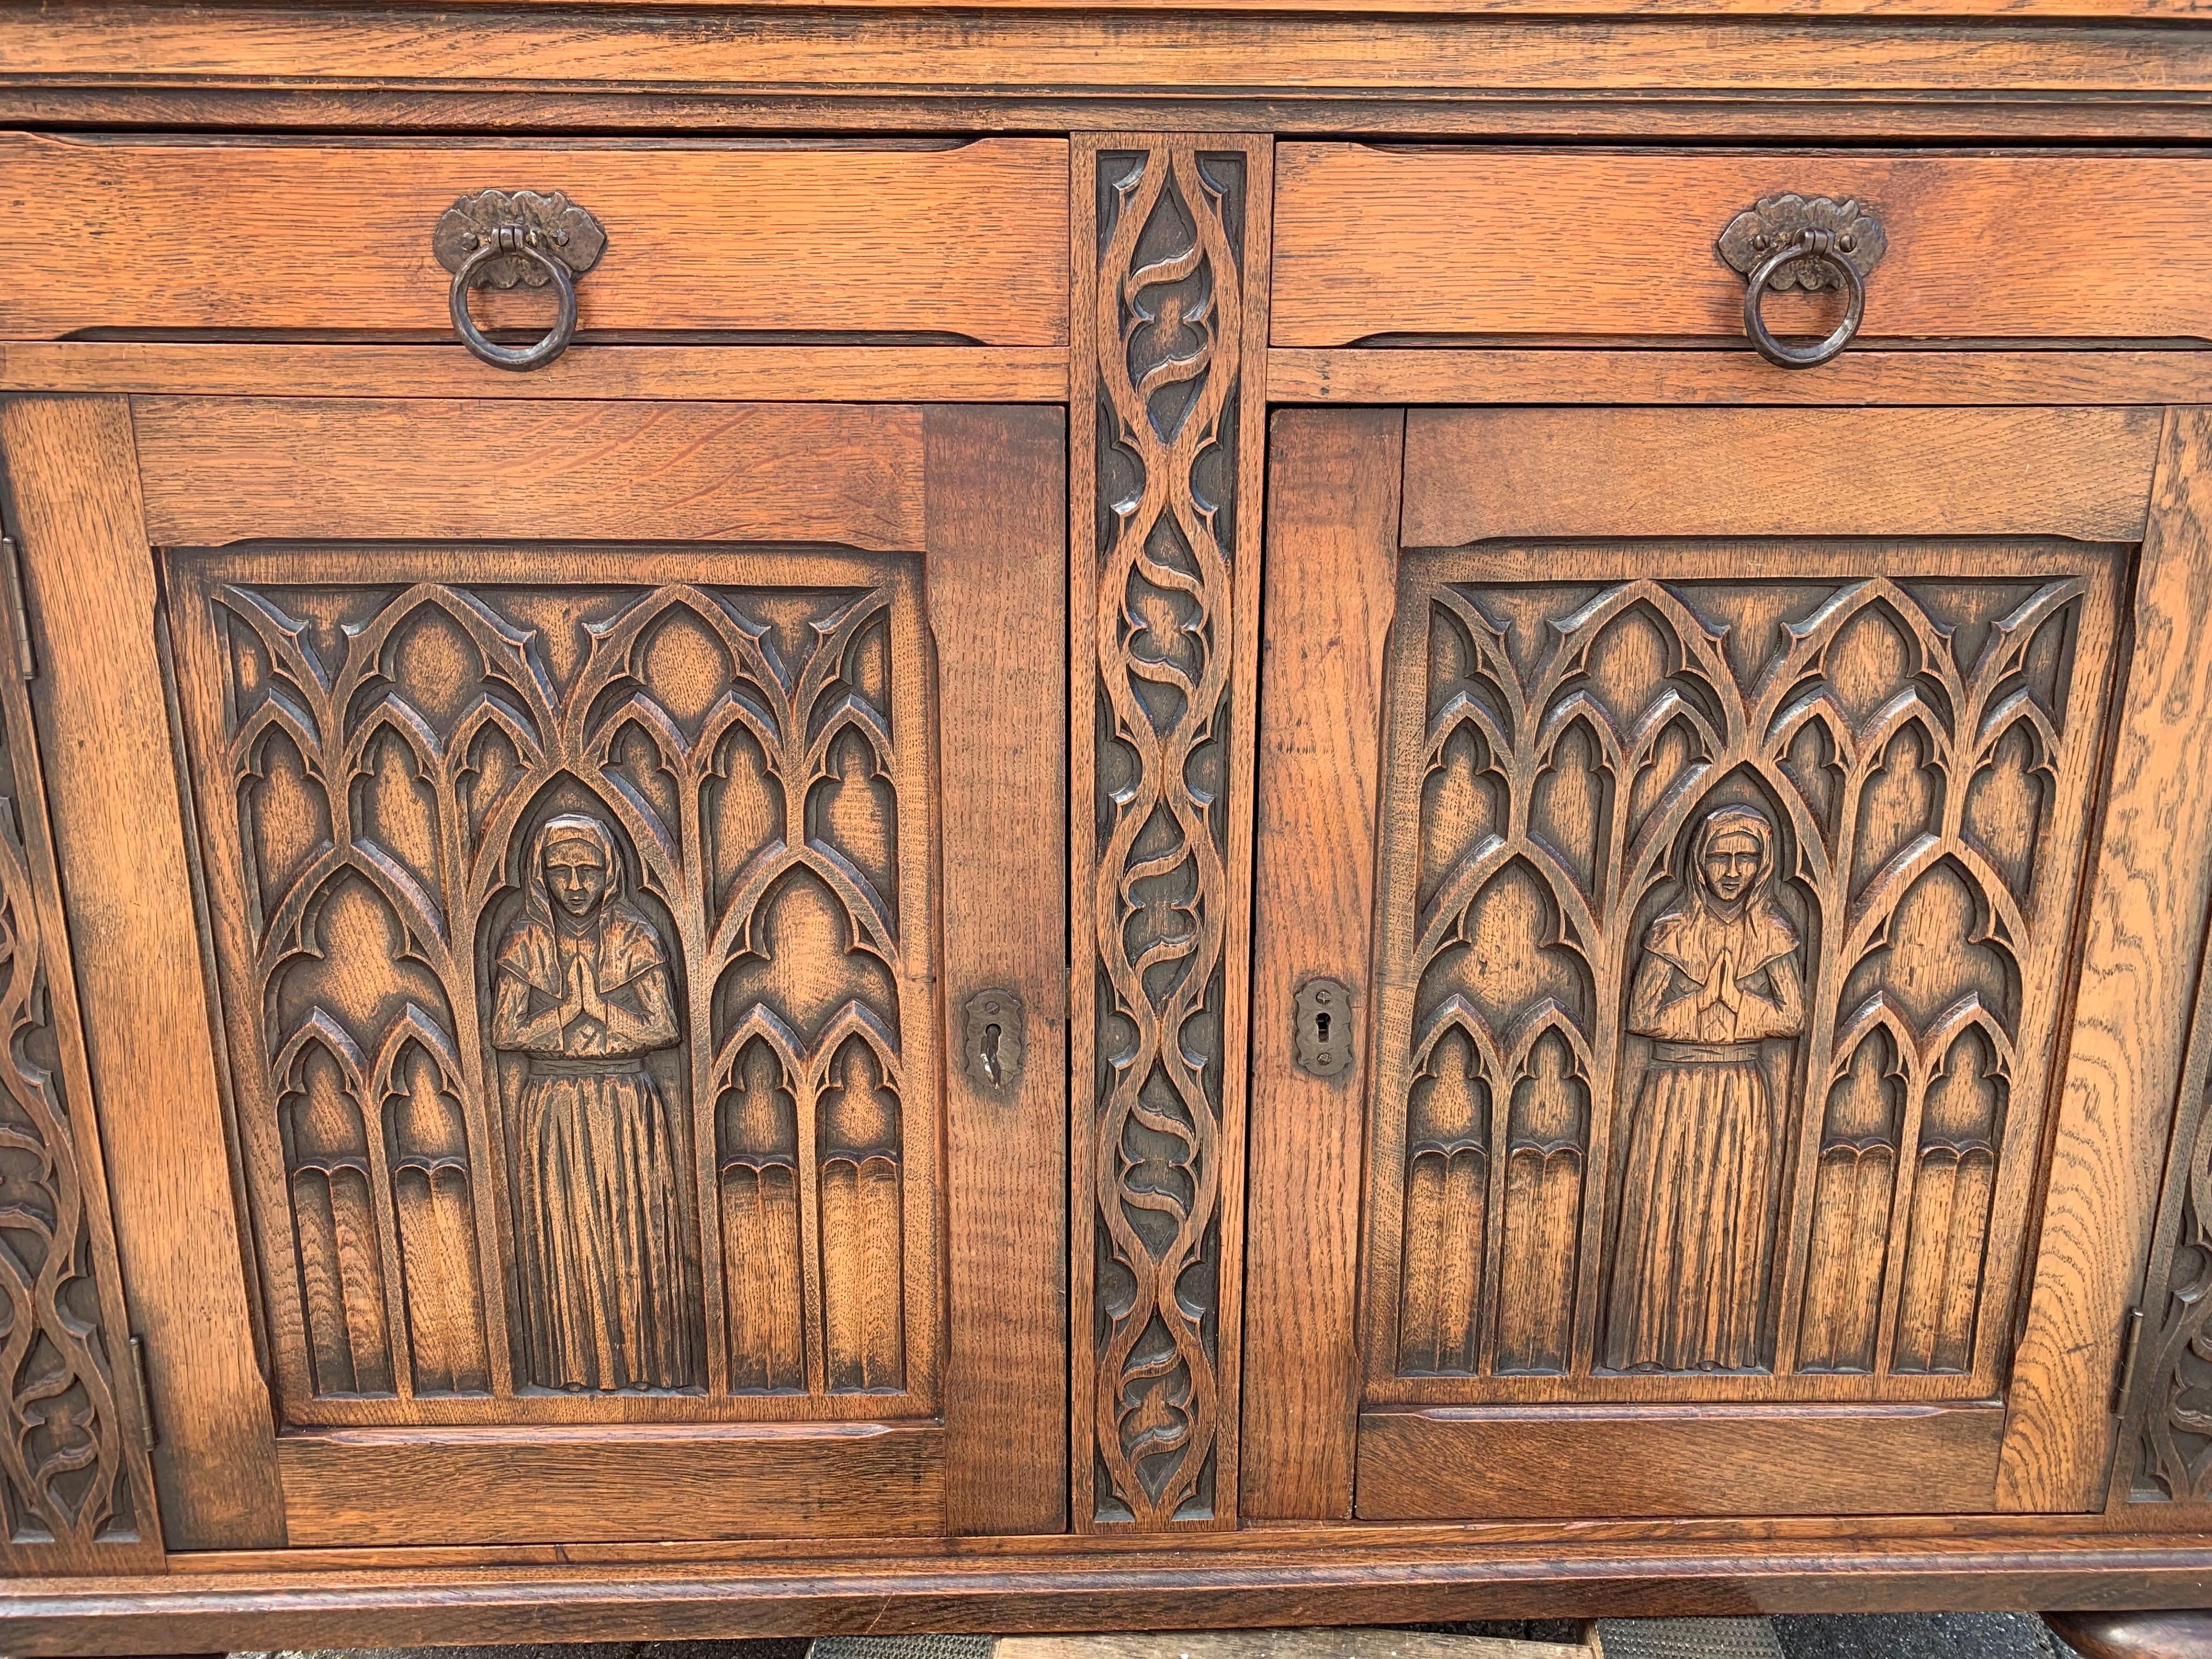 Early 20th century, solid oak Gothic cabinet with hand carved church window panels.

This beautifully and deeply carved oak cabinet from the early 1900s is in excellent condition. It comes with Fine quality, hand carved details and the warmest ever